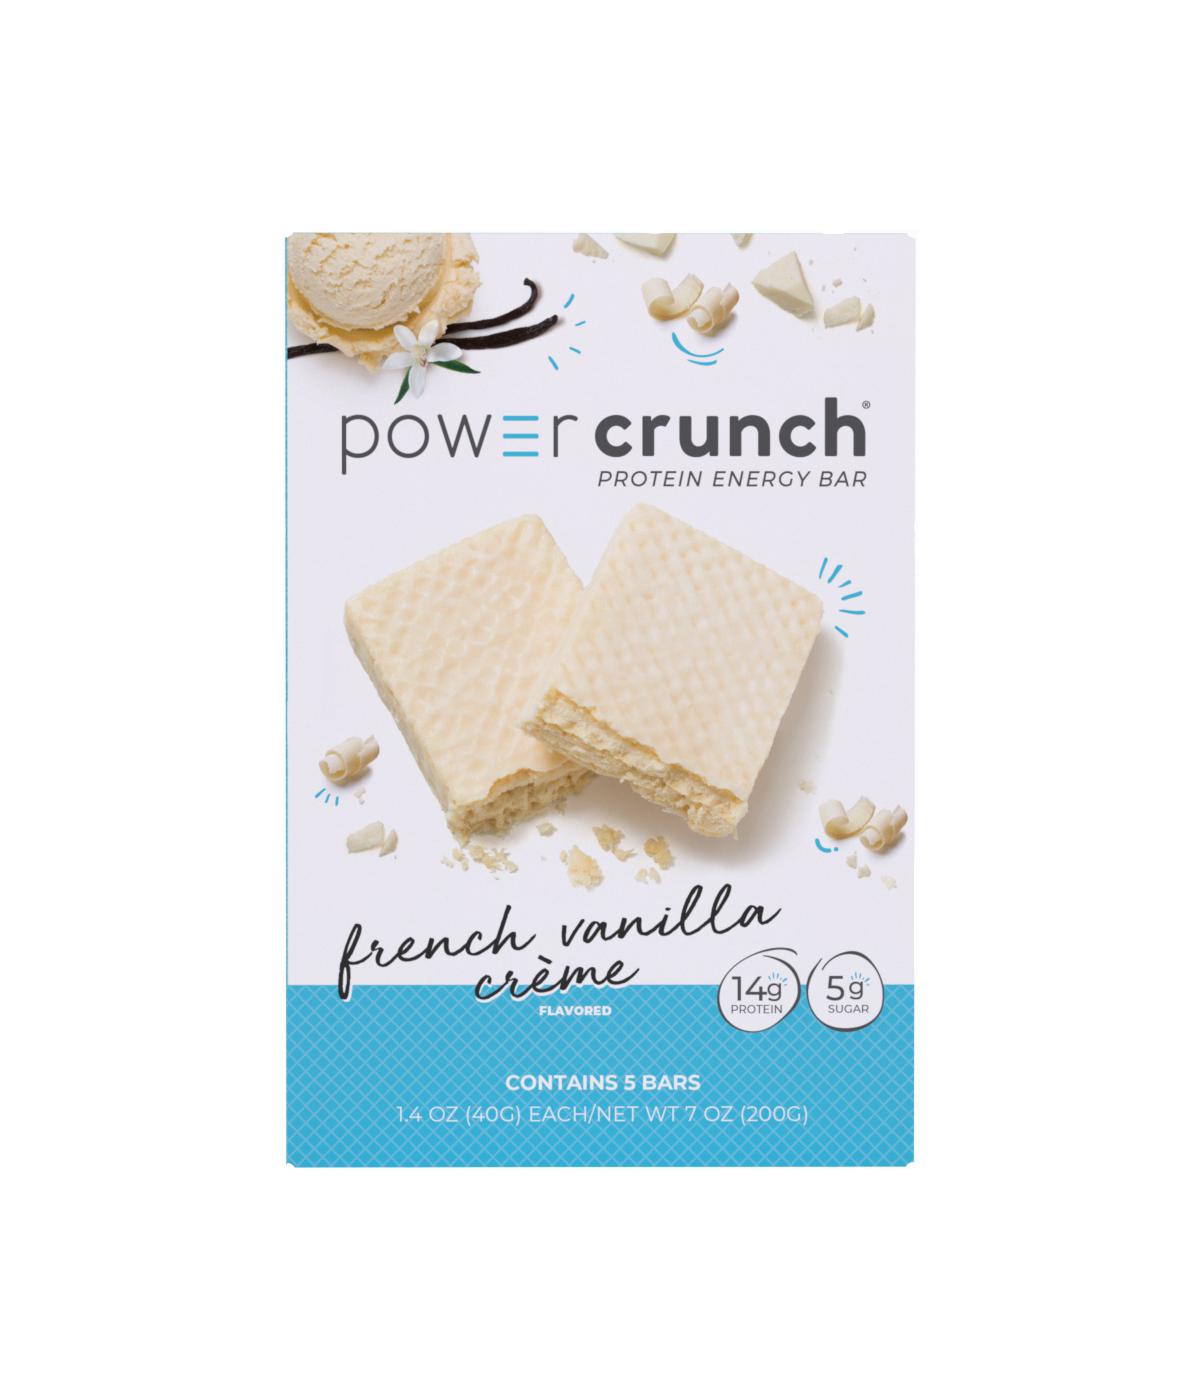 Power Crunch 14g Protein Energy Bars - French Vanilla Crème; image 1 of 2